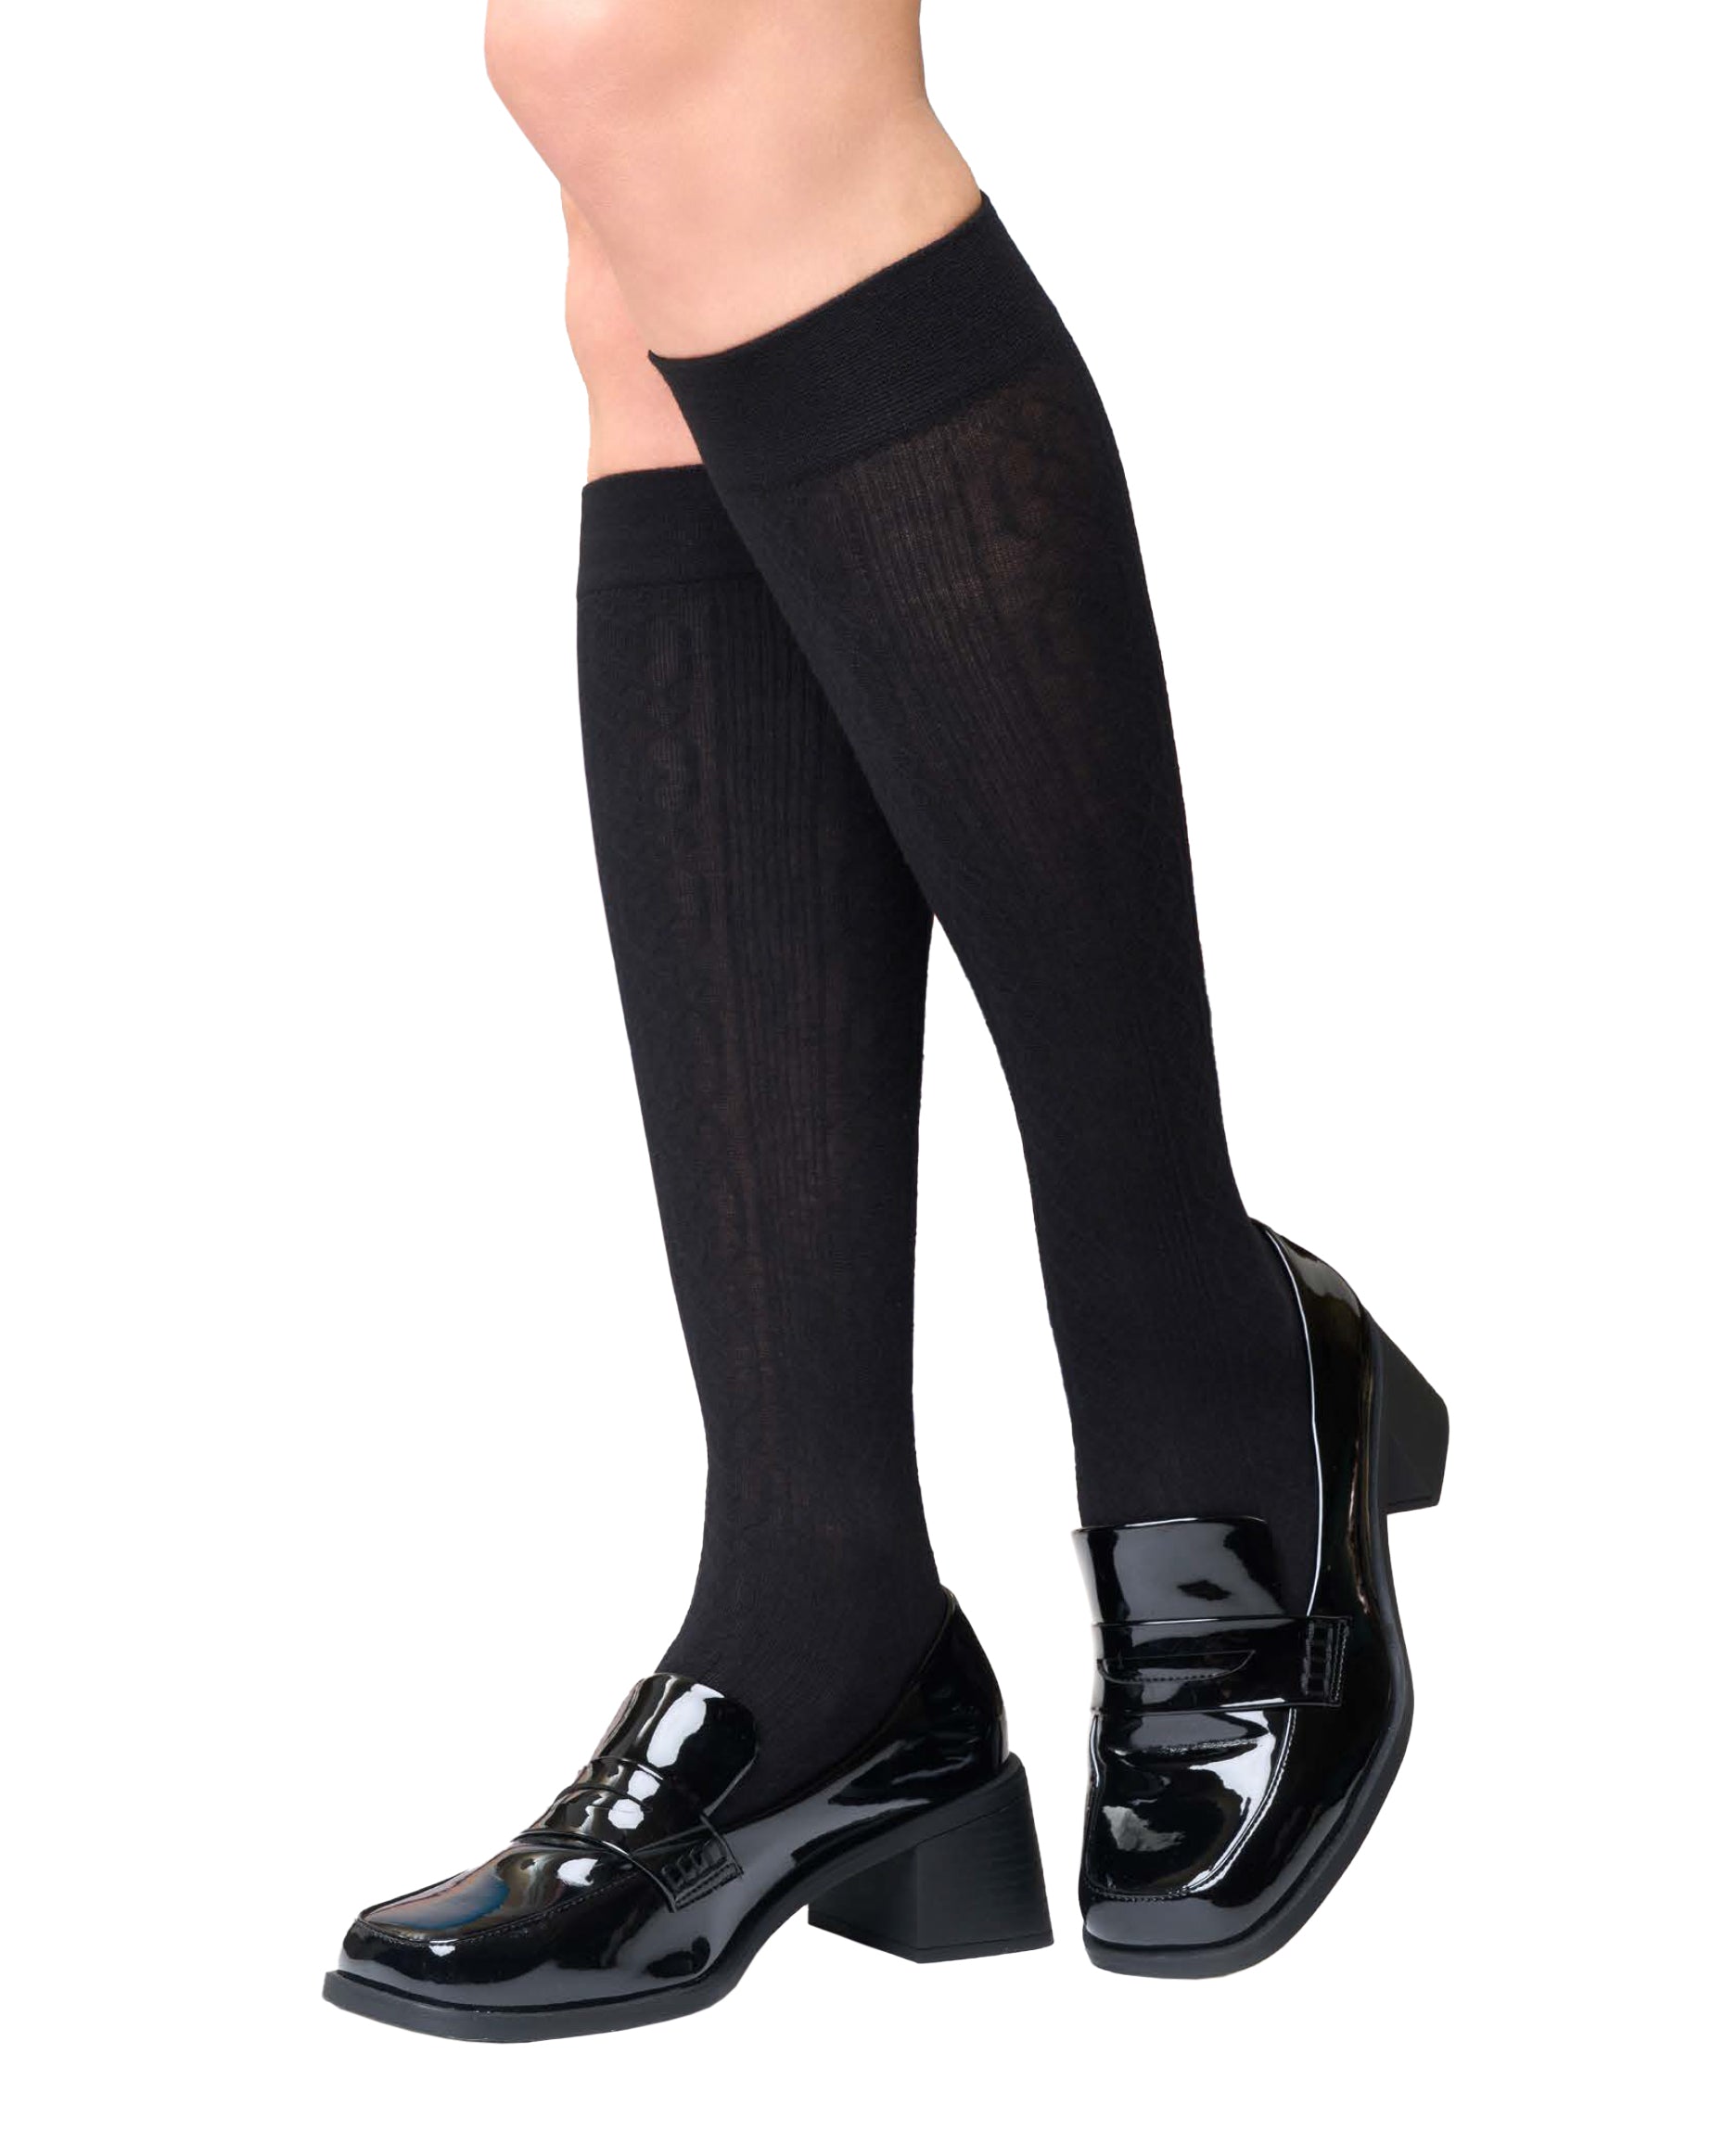 SiSi Heat Gambaletto - Black opaque thermal fashion knee length socks with cotton and wool blend, textured knitted cable/plait style pattern and deep elasticated comfort cuff.